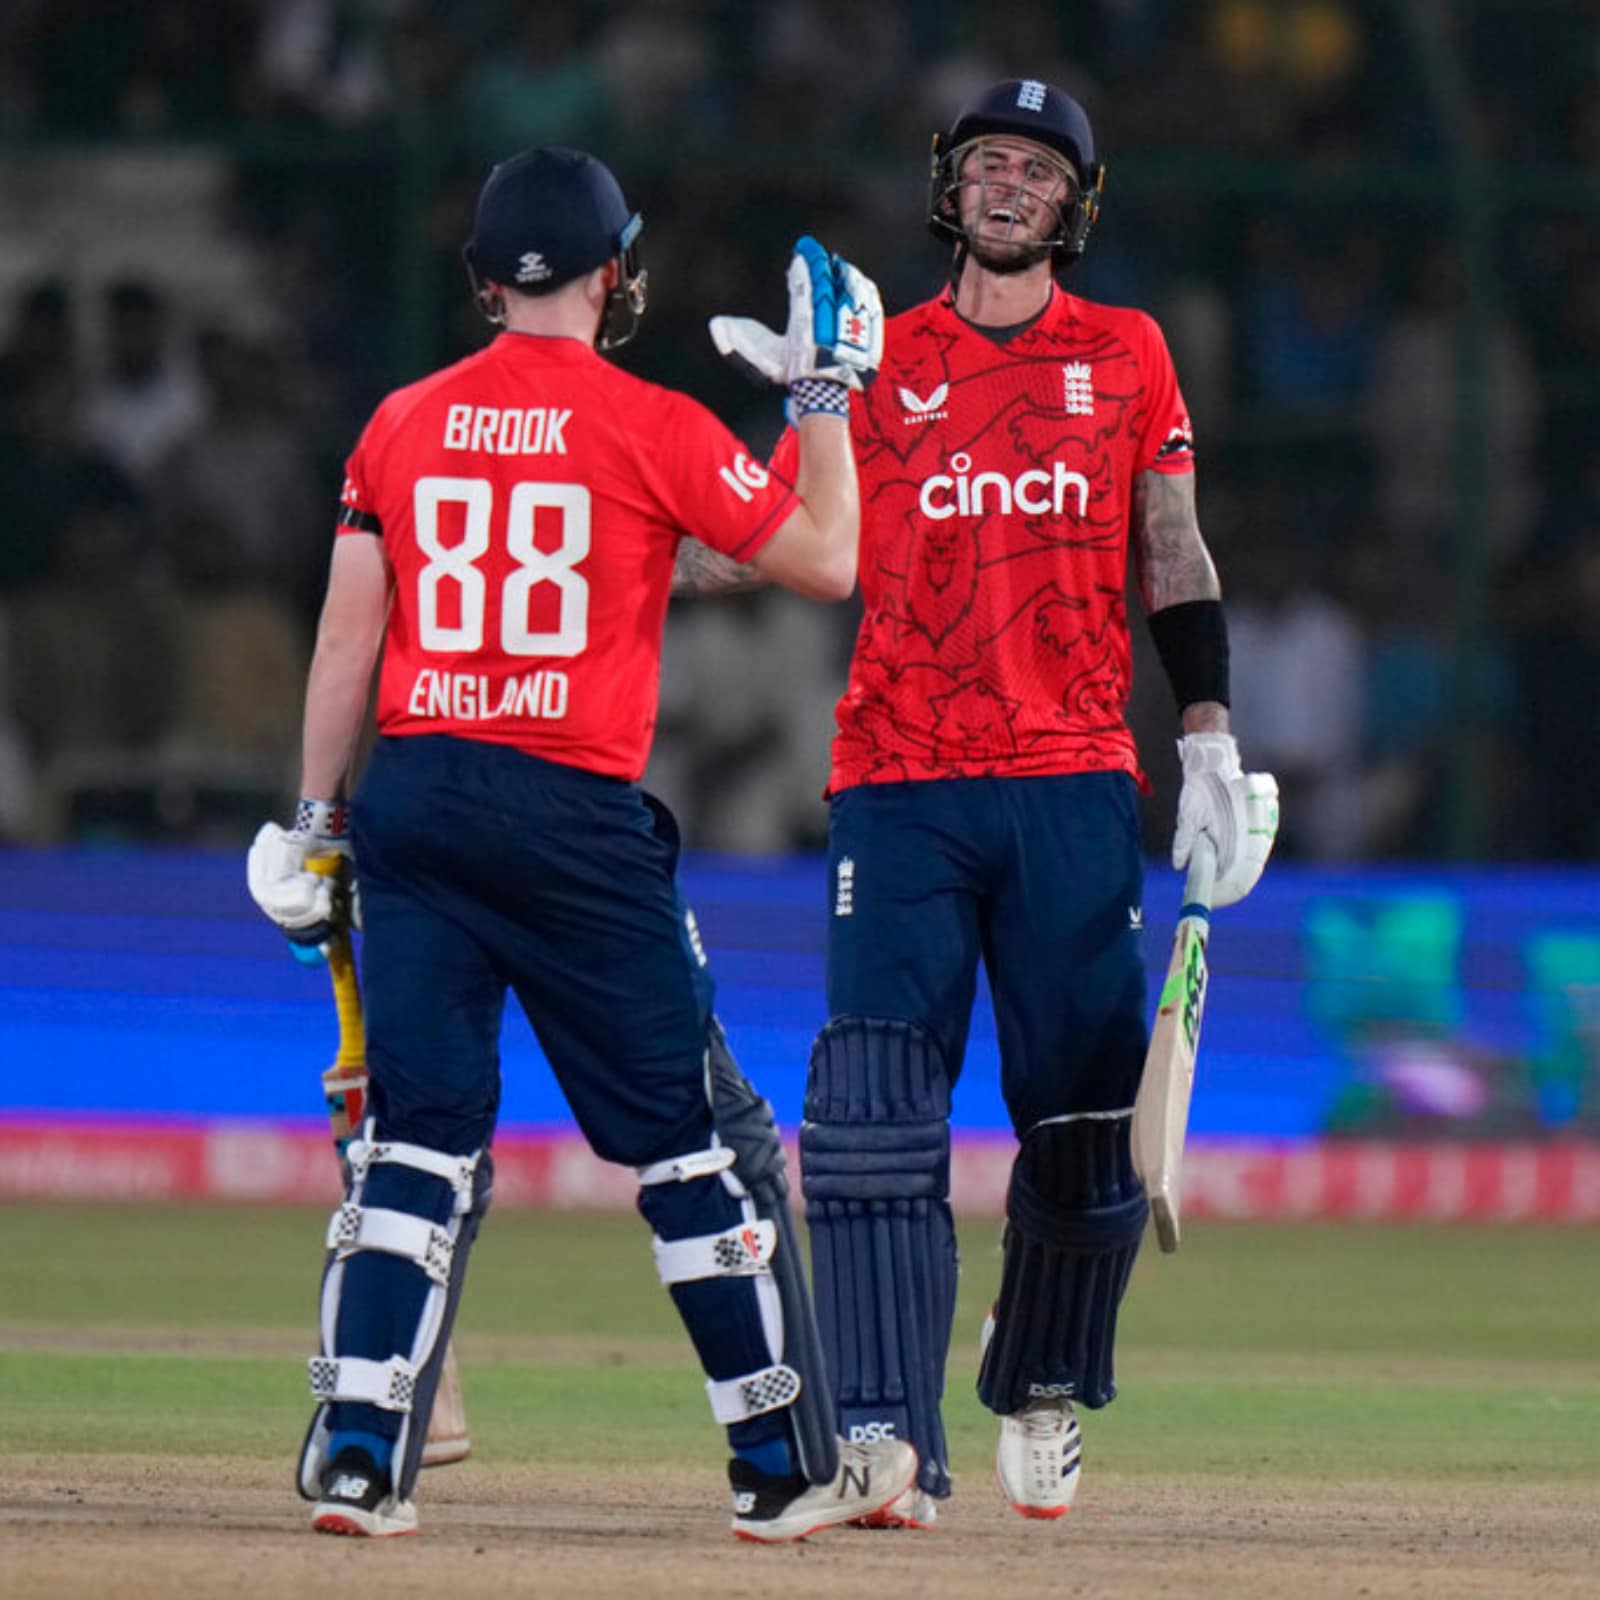 PAK vs ENG 2022 Live Cricket Streaming How to Watch Pakistan vs England, 2nd T20I on TV And Online